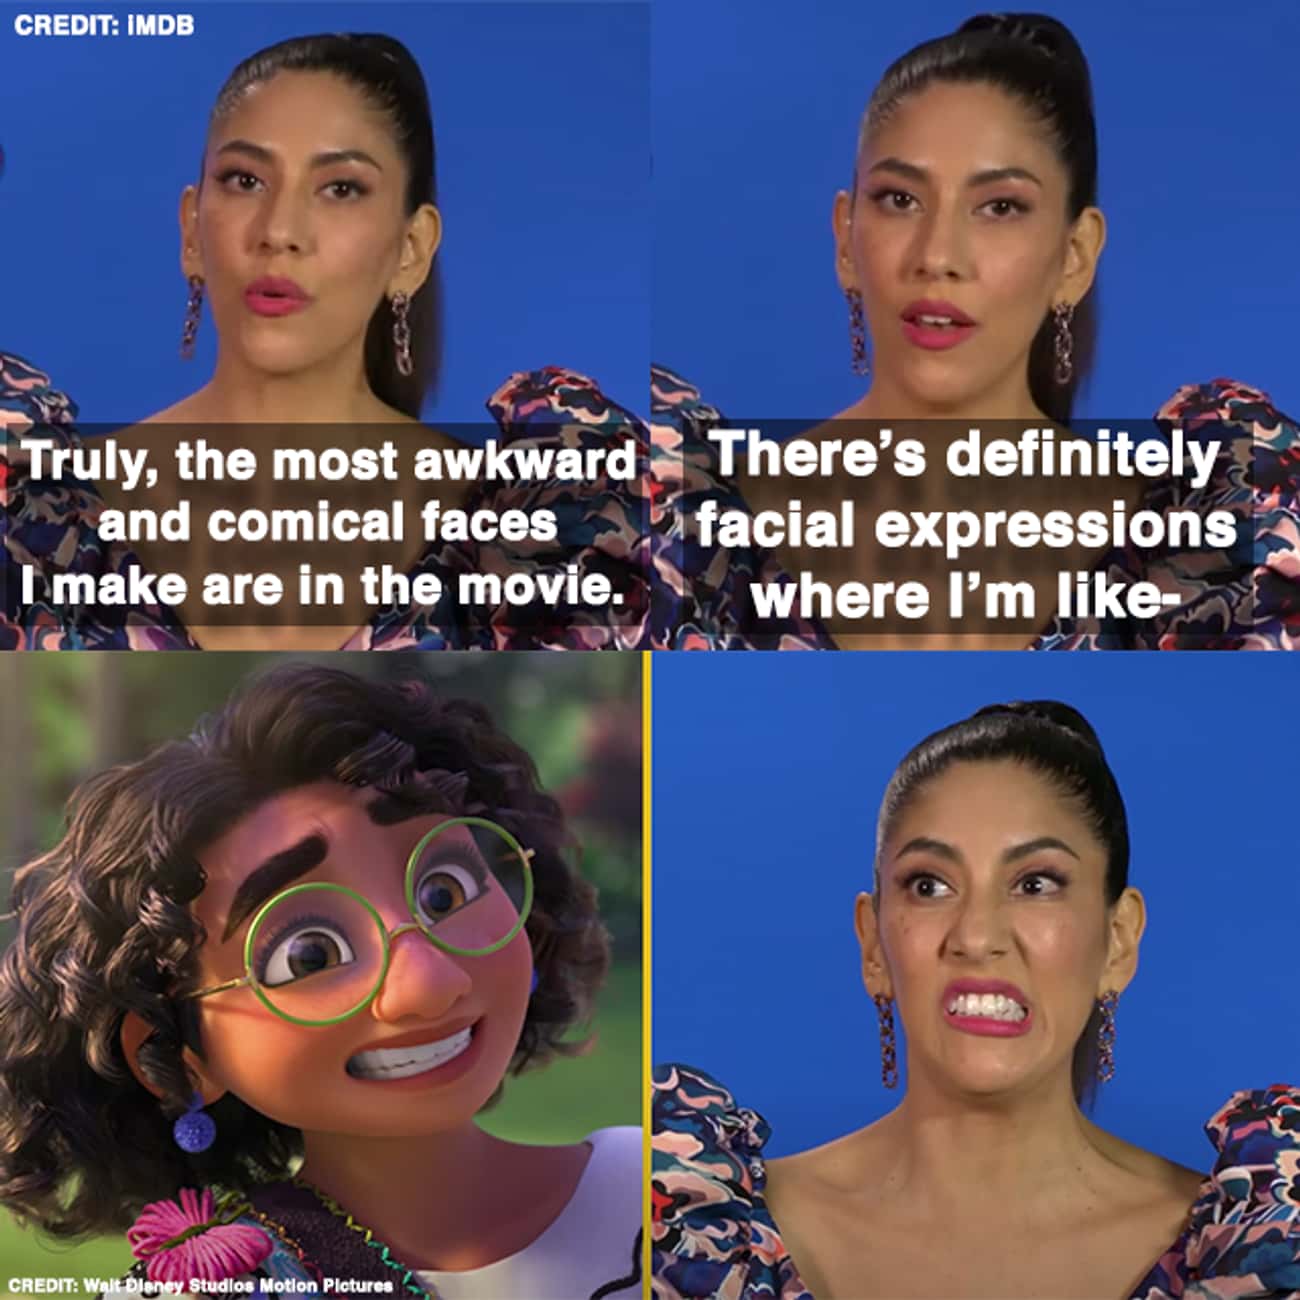 When Stephanie Beatriz Talked About How Many Of Her Facial Expressions Made It In The Movie